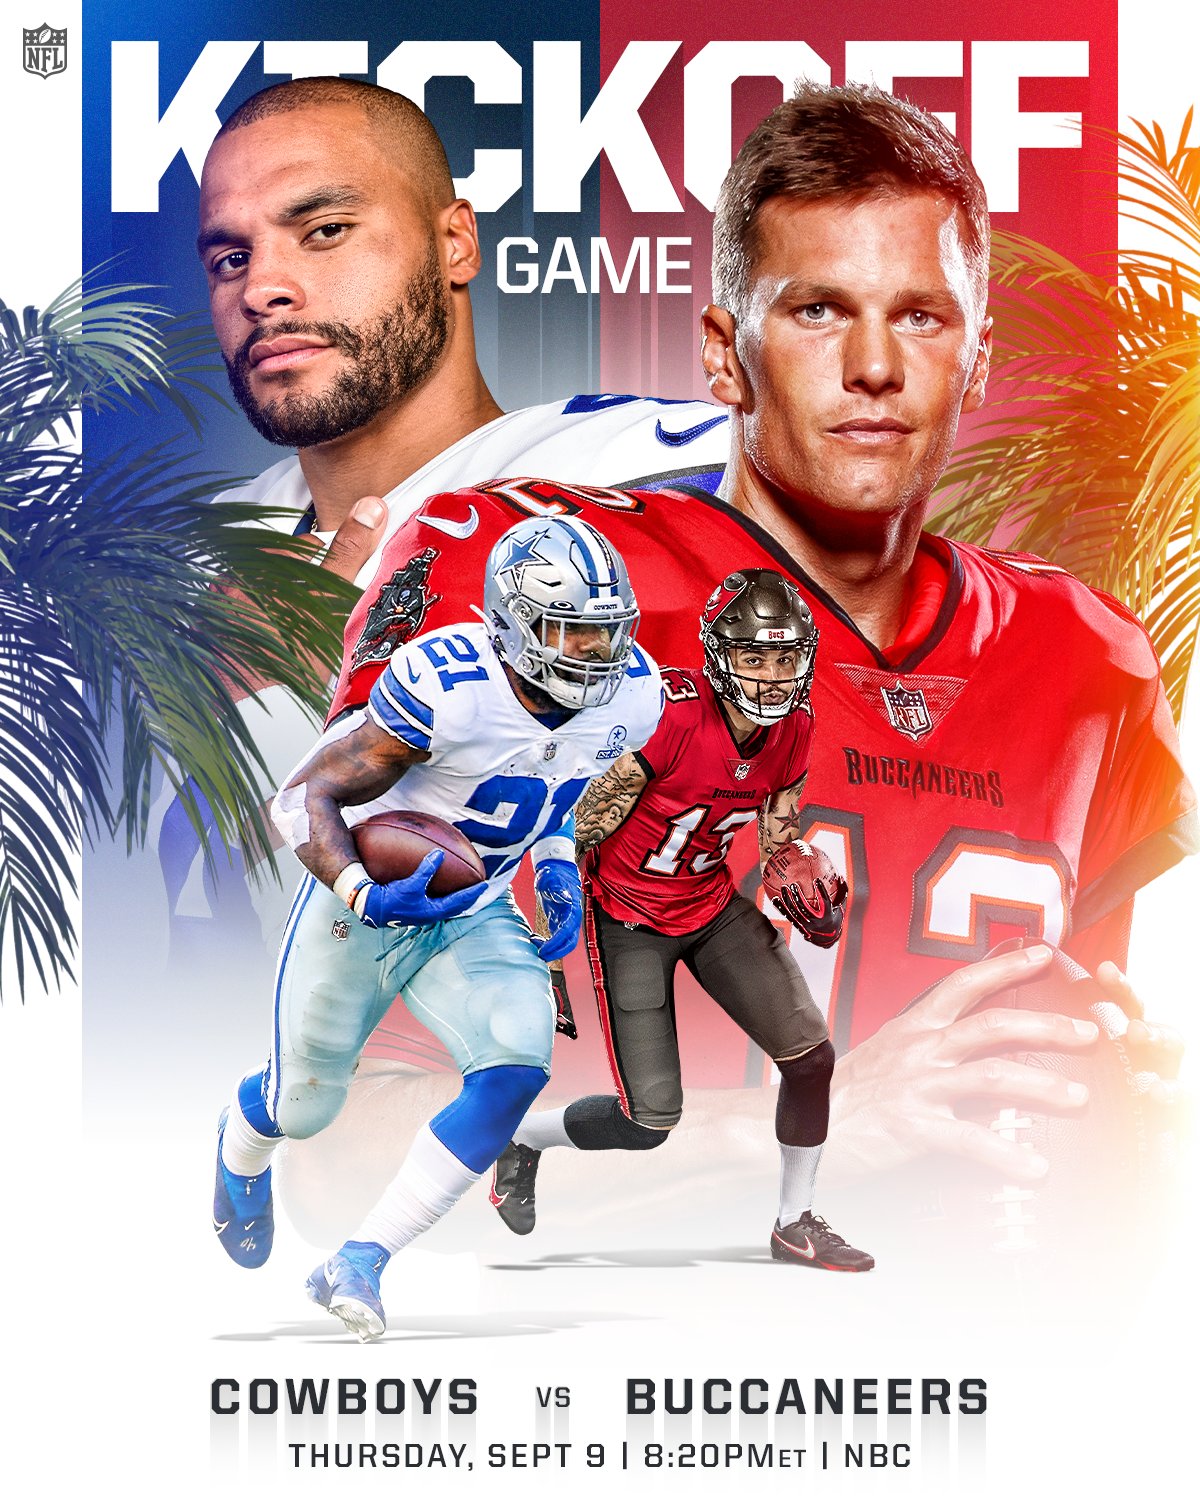 cowboys and buccaneers football game